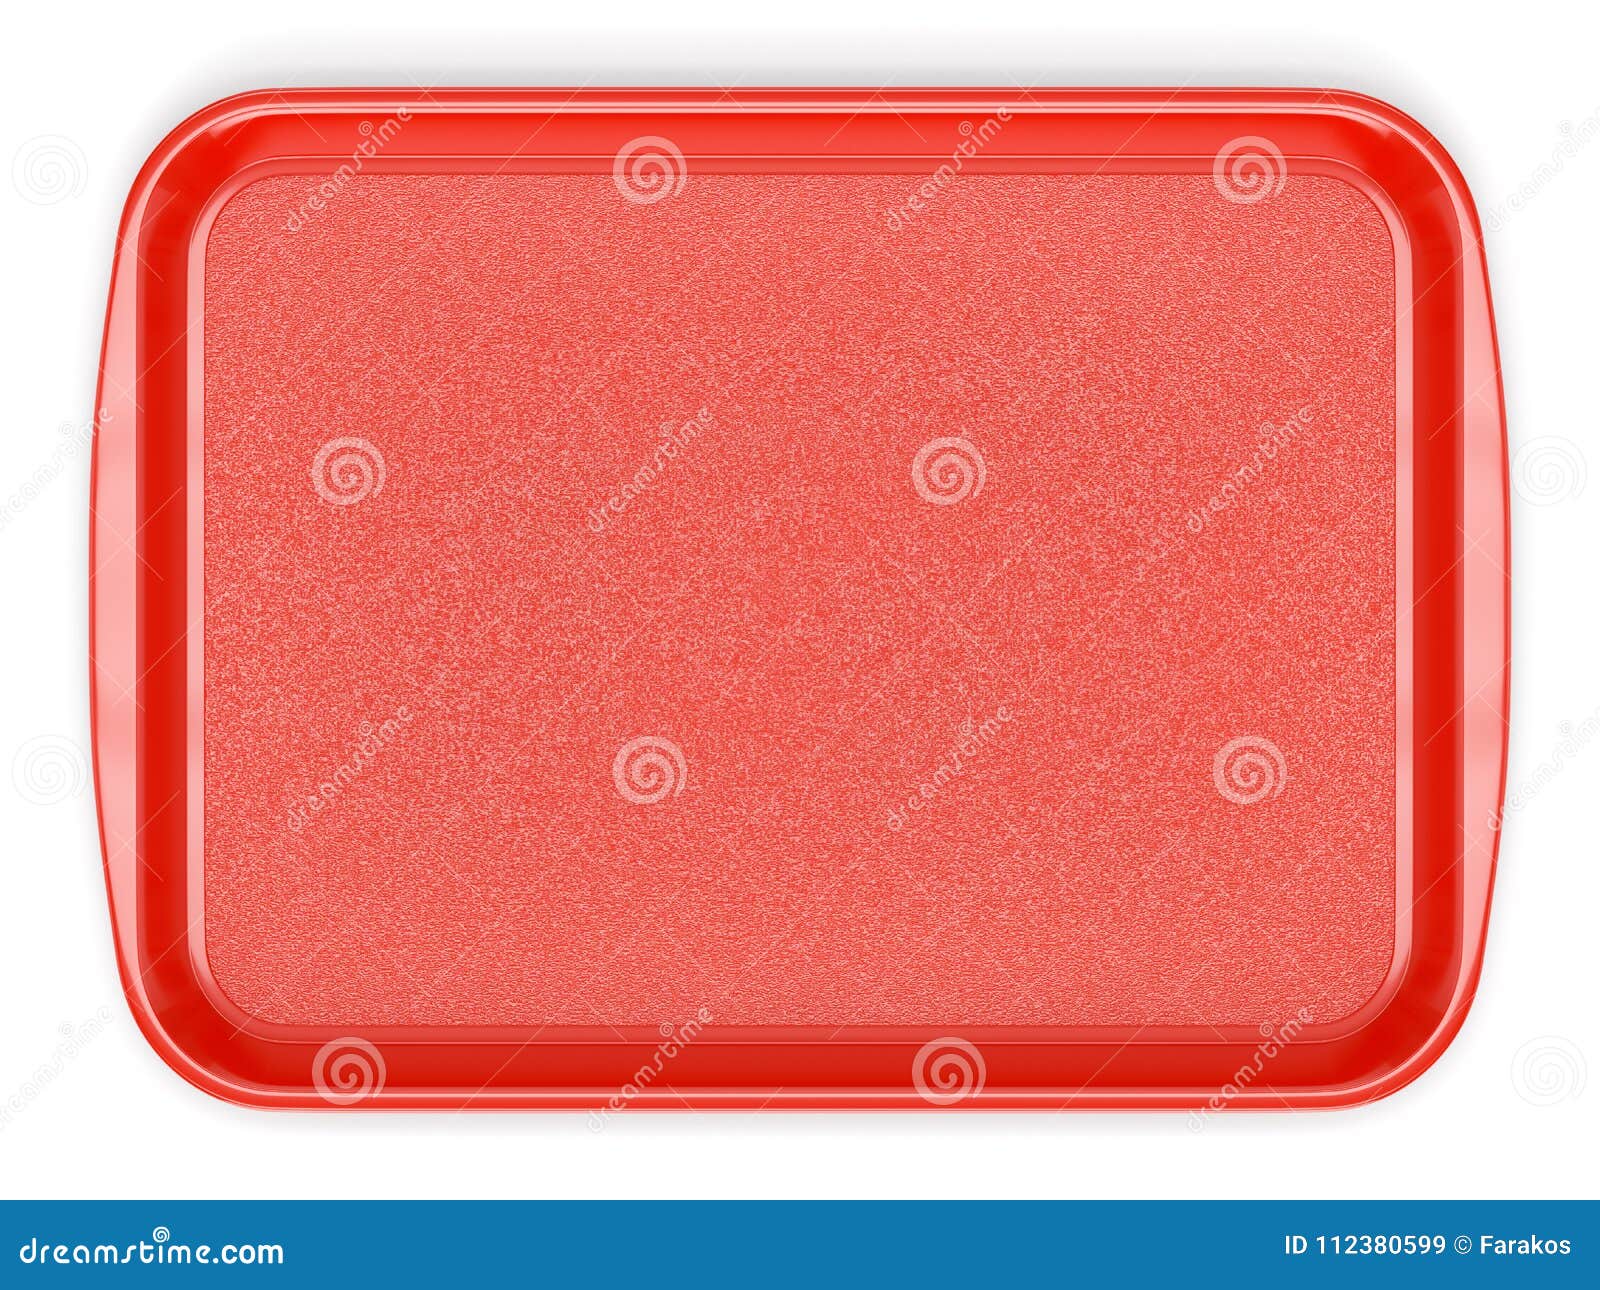 red plastic food tray